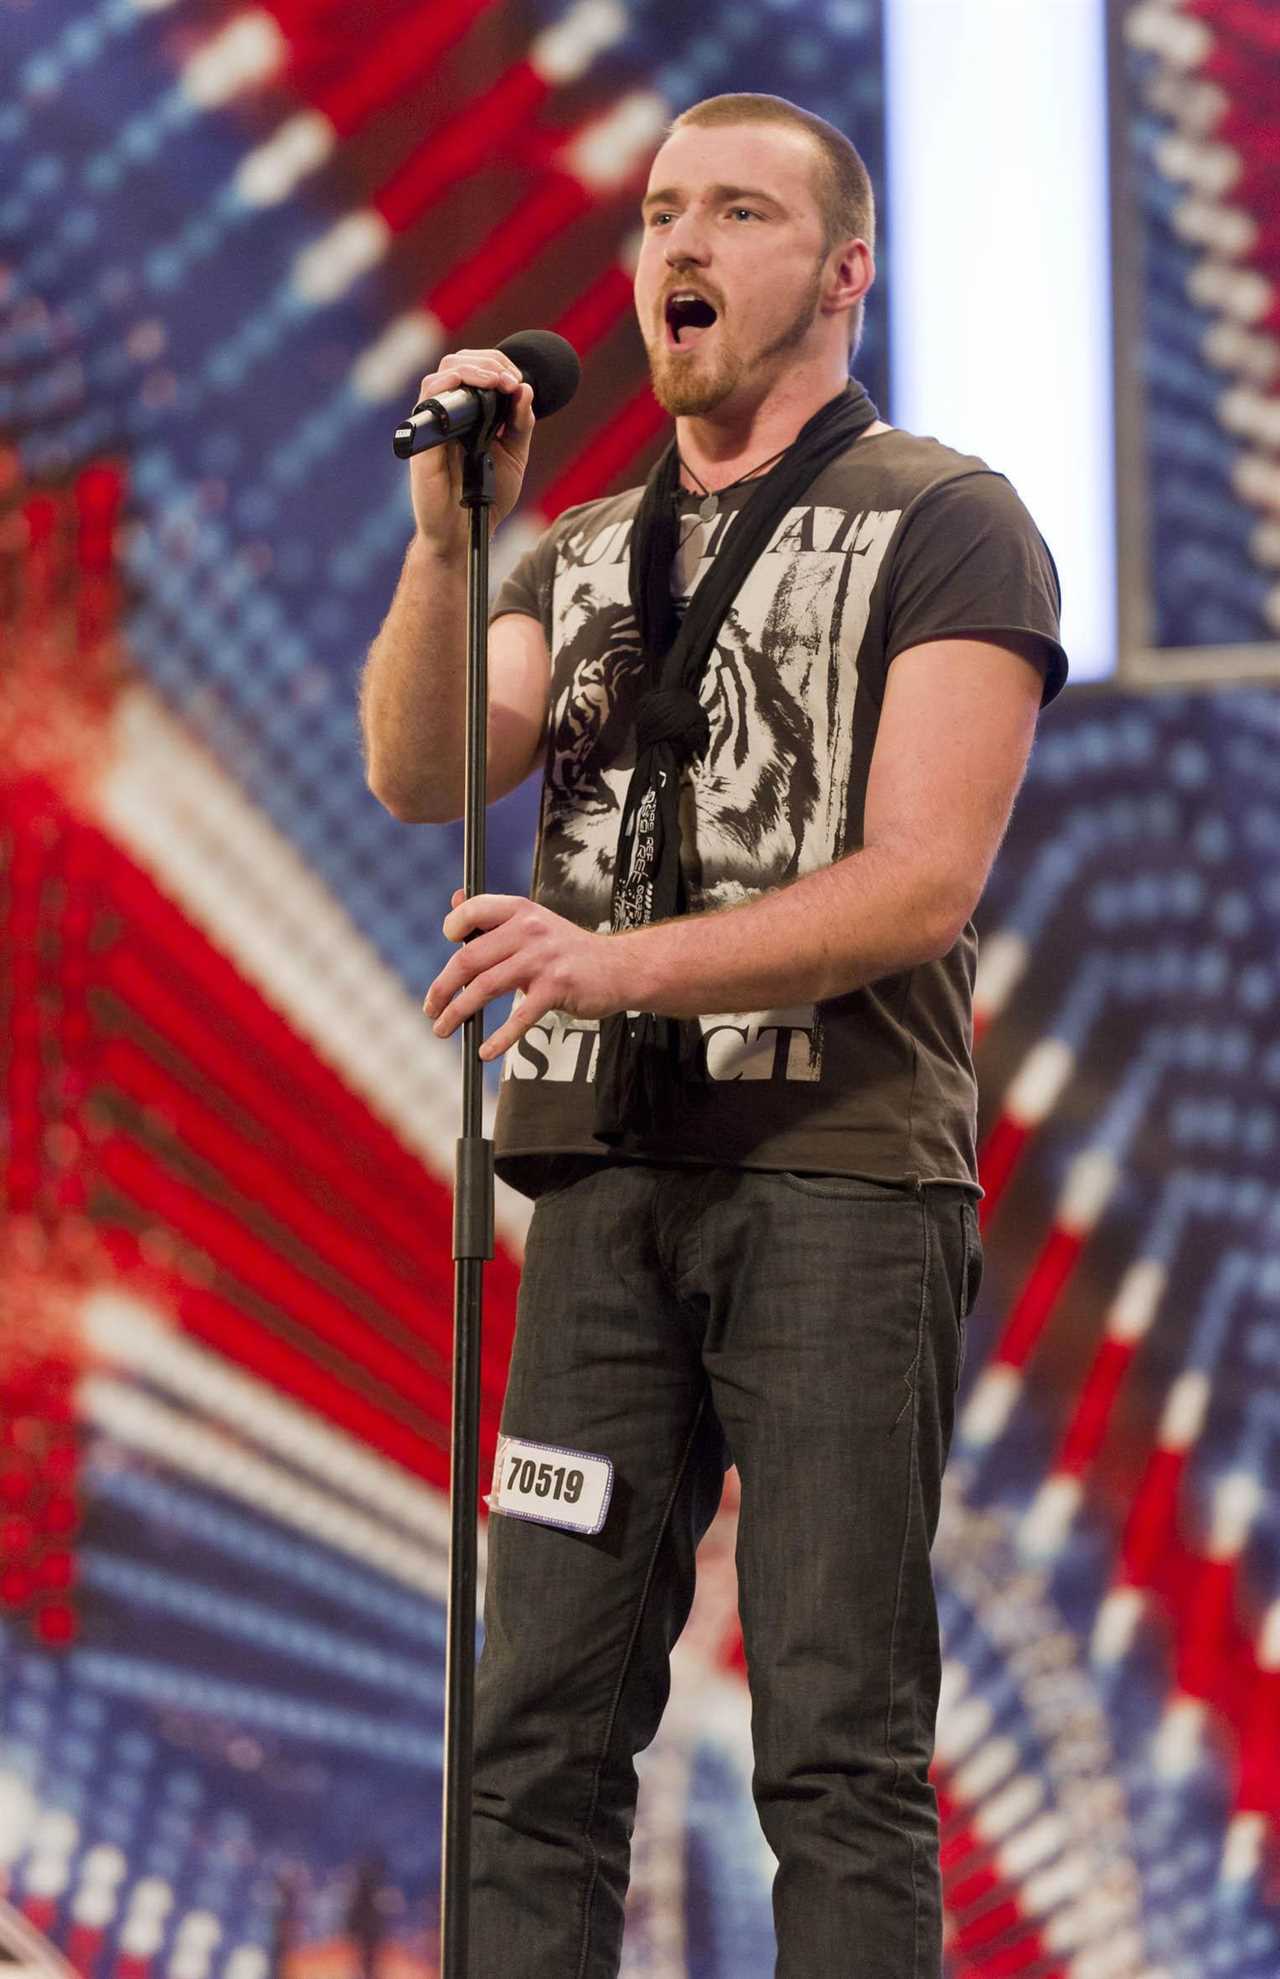 From Britain's Got Talent Winner to Career Challenges: Jai McDowall's Journey